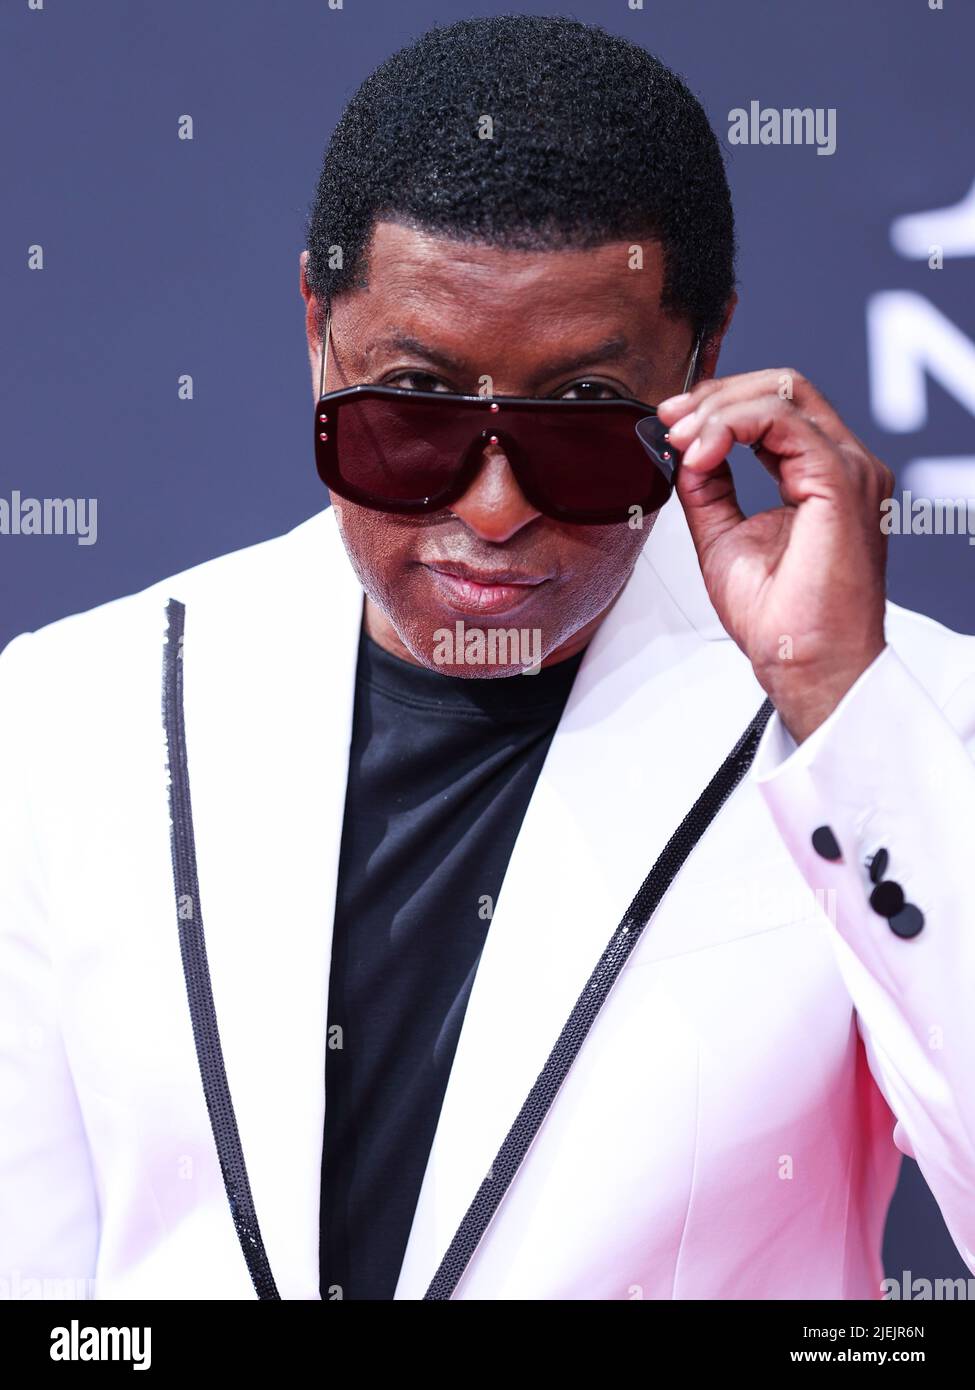 LOS ANGELES, CALIFORNIA, USA - JUNE 26: Babyface arrives at the BET Awards 2022 held at Microsoft Theater at L.A. Live on June 26, 2022 in Los Angeles, California, United States. (Photo by Xavier Collin/Image Press Agency) Credit: Image Press Agency/Alamy Live News Stock Photo